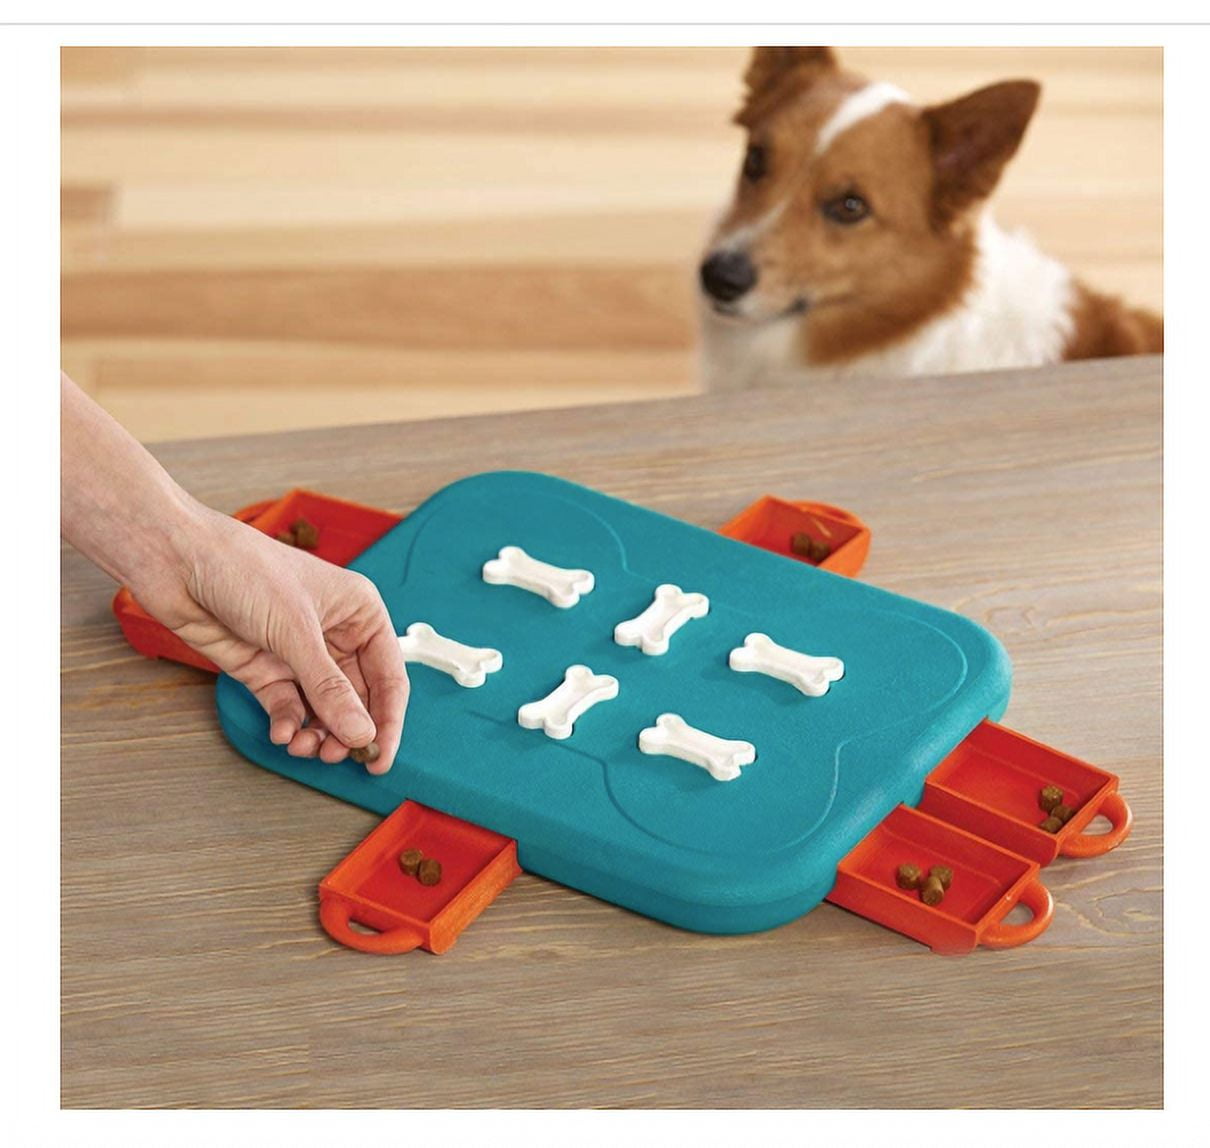 Dog Puzzle 3 Tired/multi Level Interactive Cognitive Treat